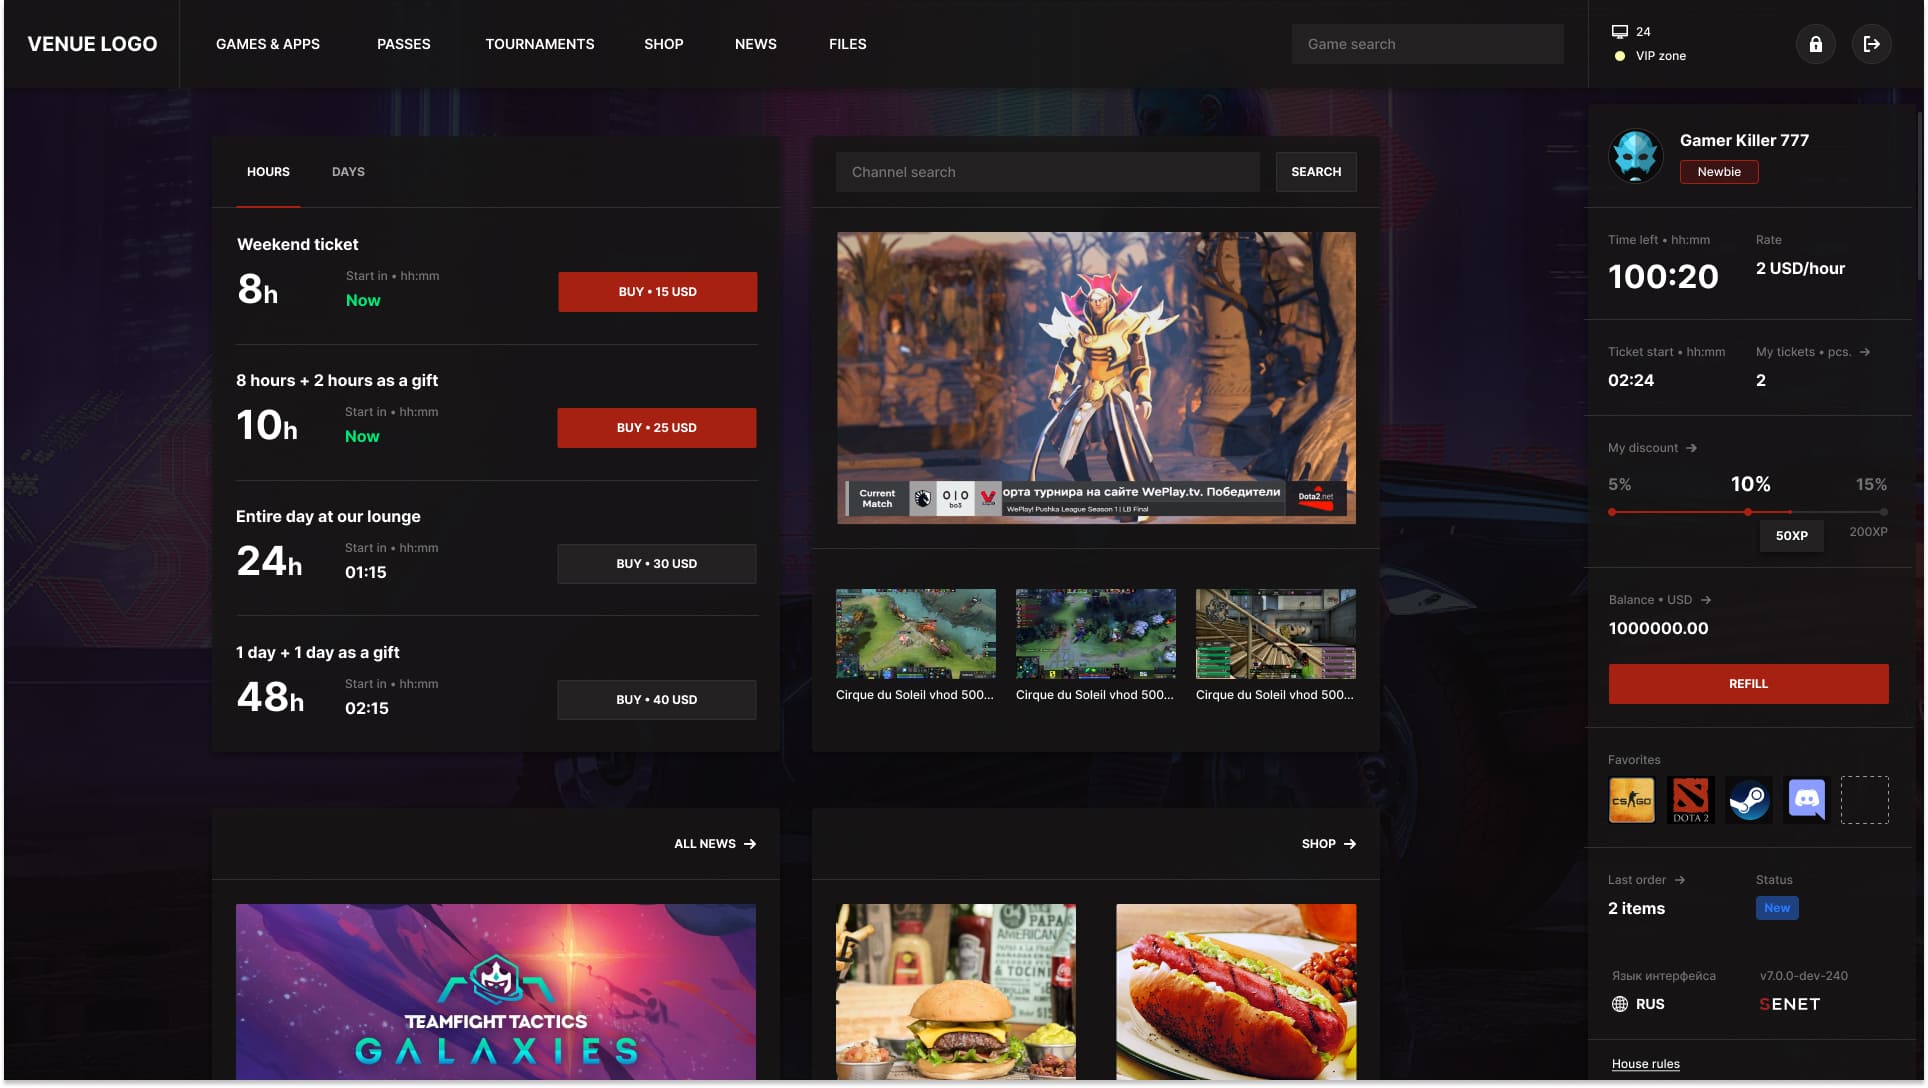 Gamer Interface (Shell). Gamer's accountCustomers get full overview of their current session, remaining balance, and available time offers. Gamers can easily purchase food or beverage while playing their favorite games.